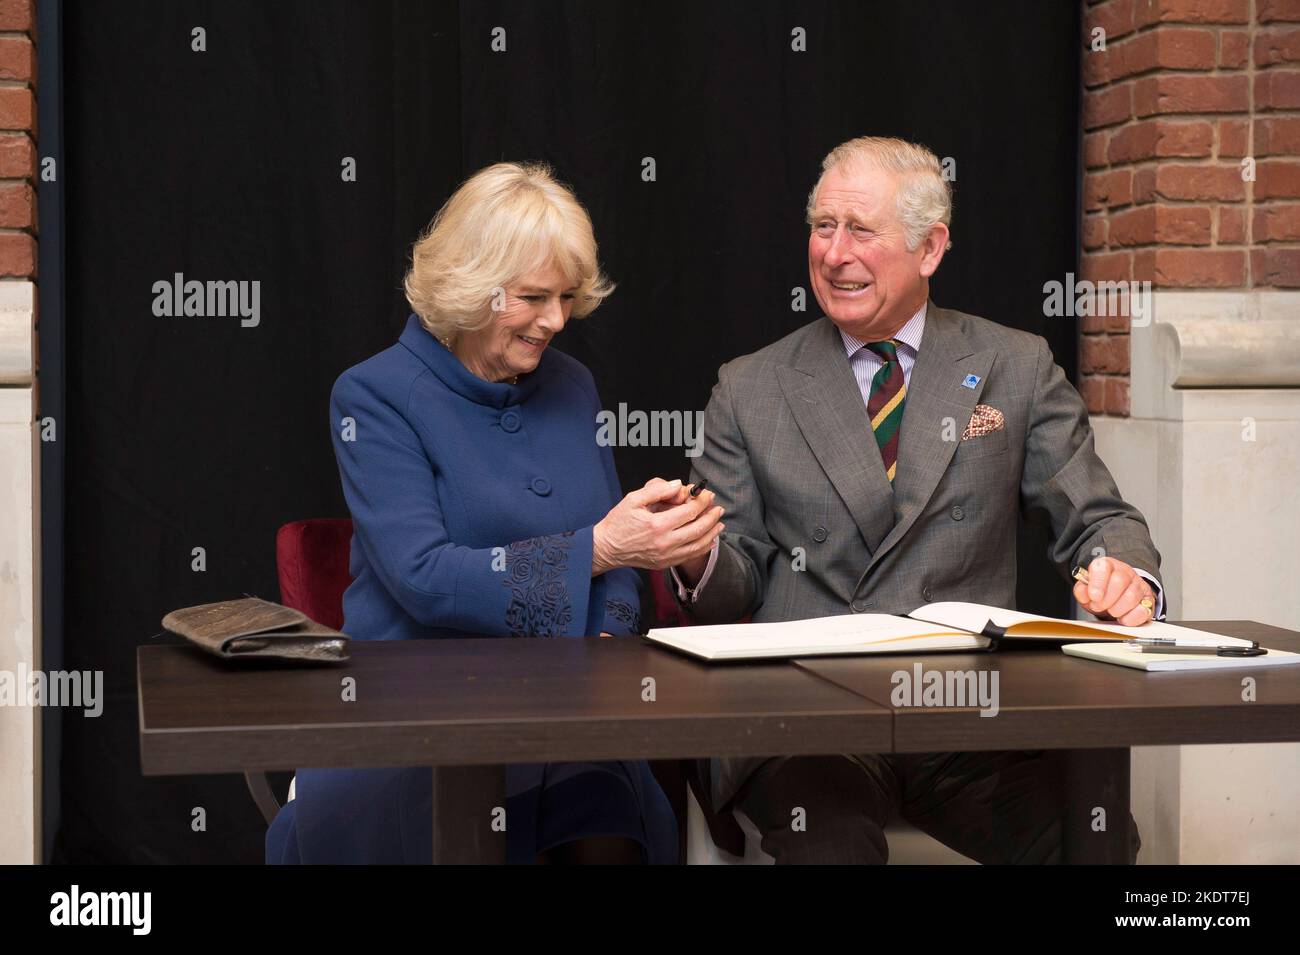 King Charles visiting Hull, UK, in February 2017 when he was Prince of Wales.He is pictured having issues with a pen while signing a visitors book wit Stock Photo